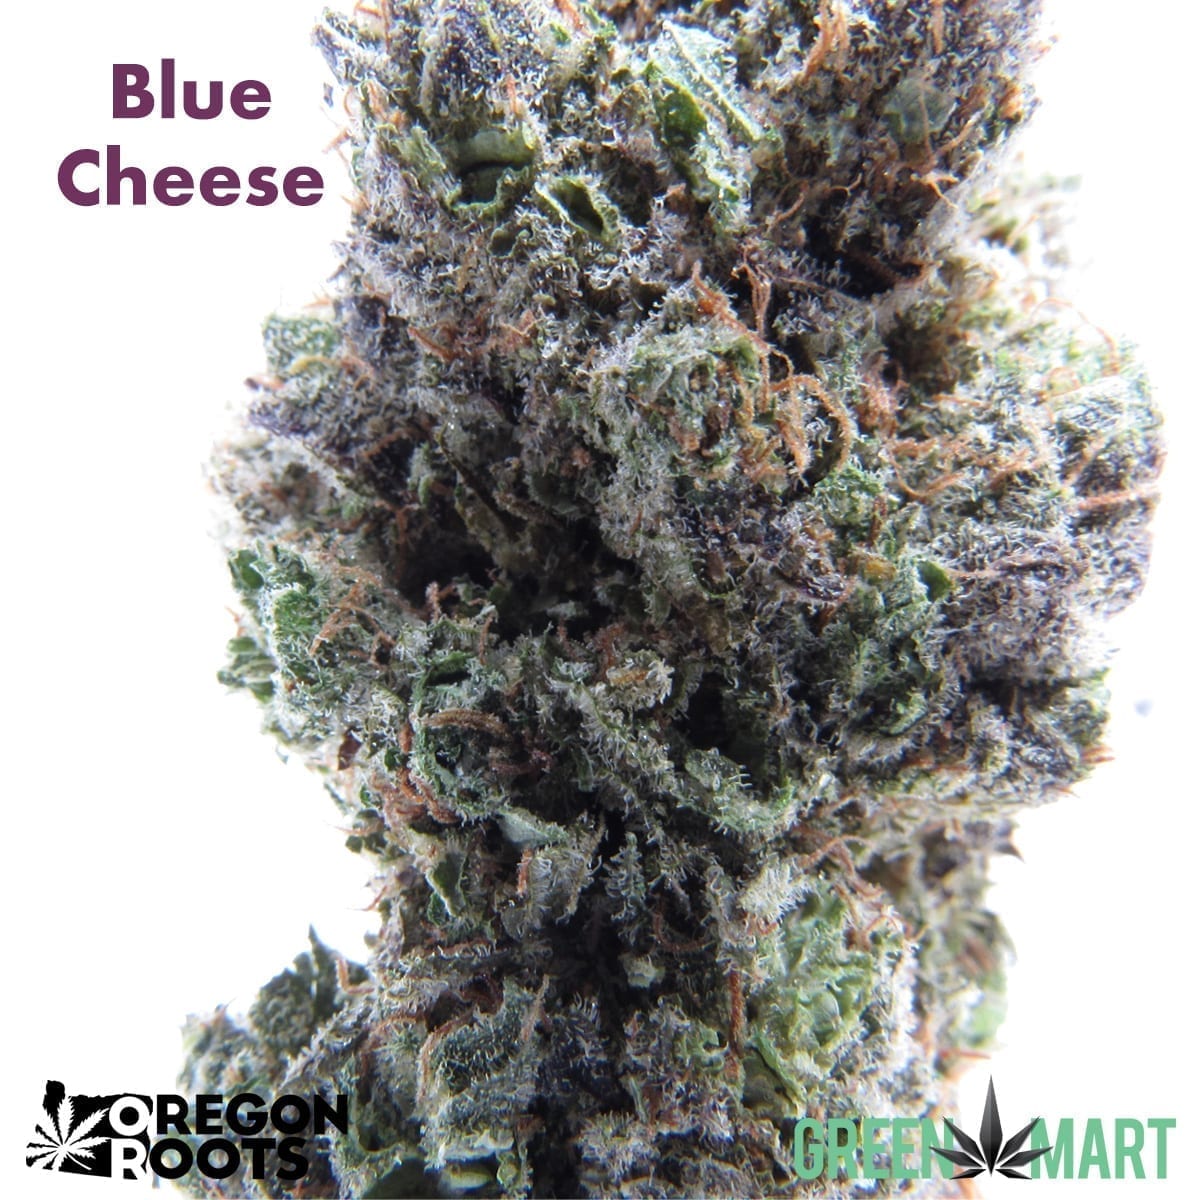 Blue Cheese by Oregon Roots